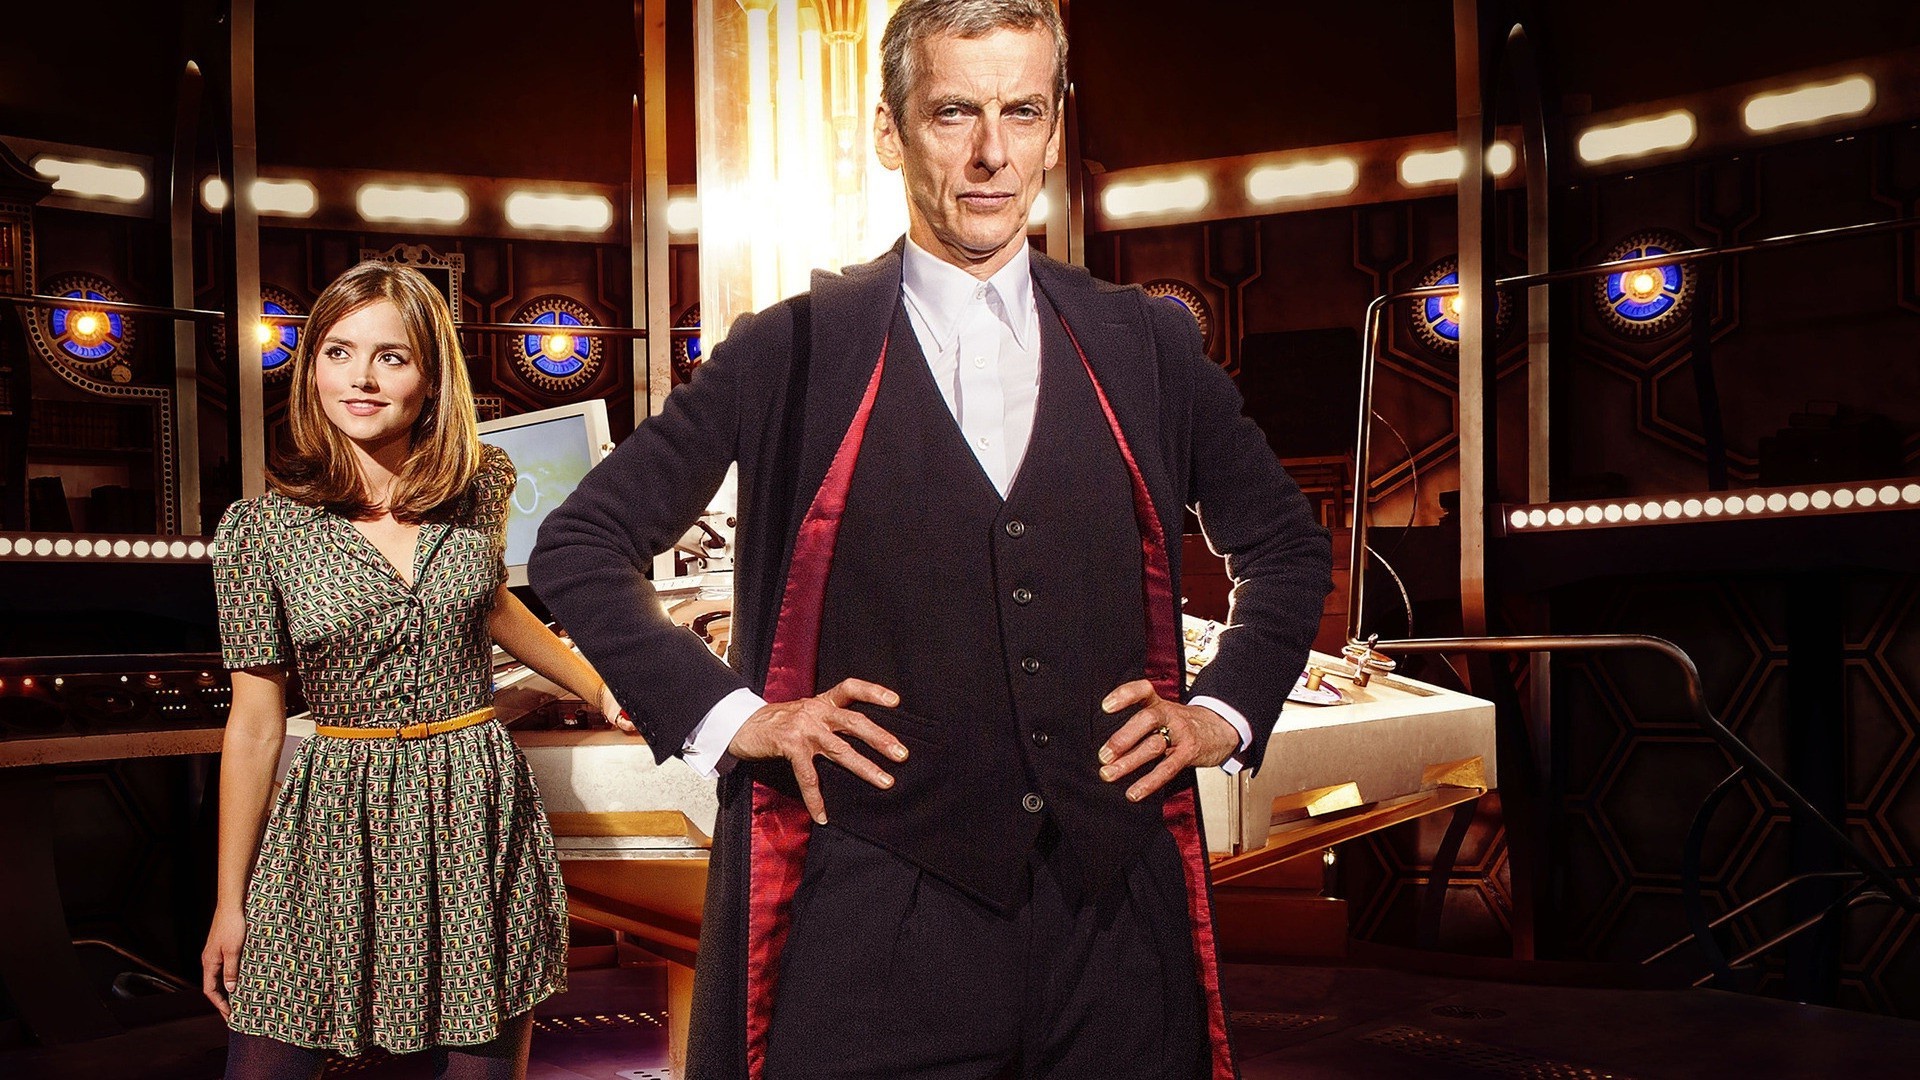 Doctor Who, The Doctor, TARDIS, Peter Capaldi, Jenna Coleman, Hands On Hips Wallpaper